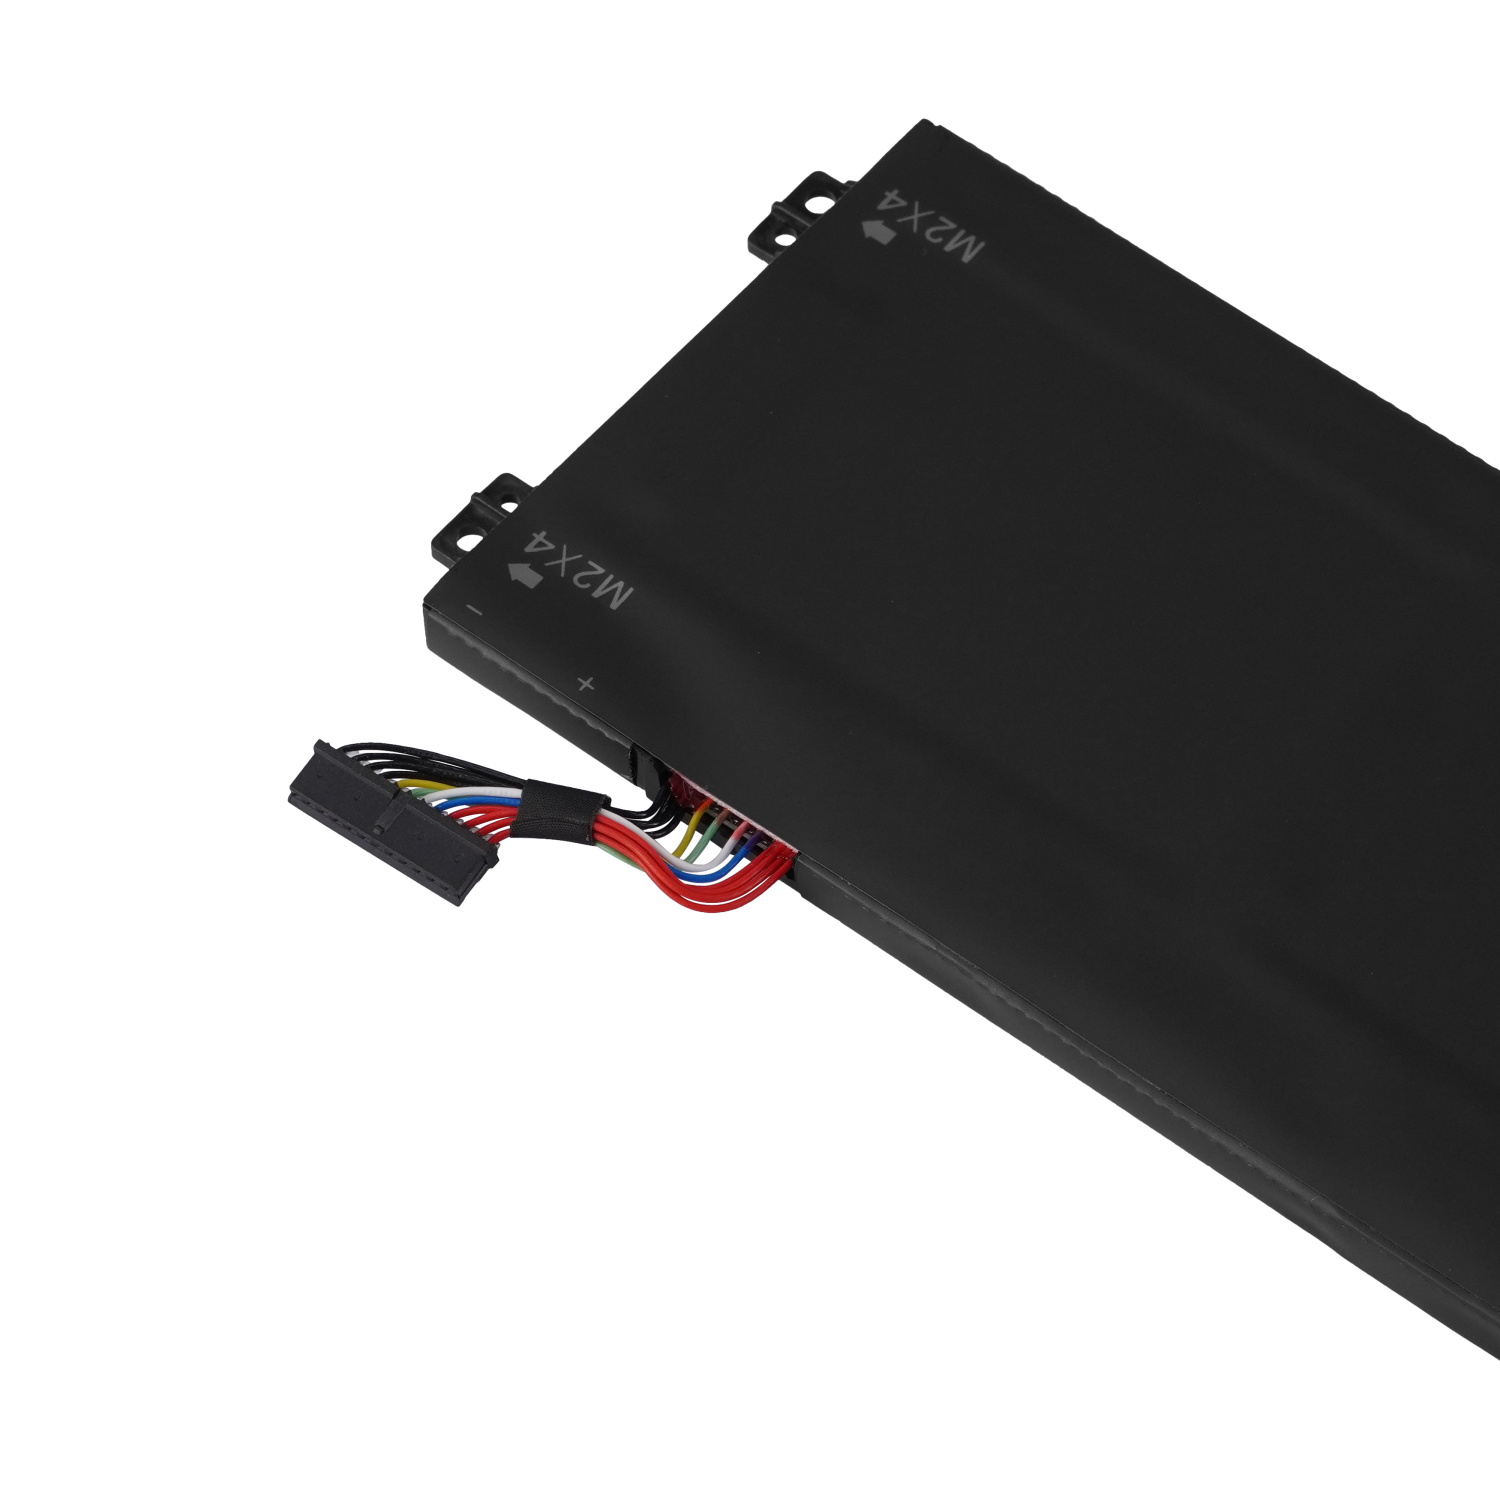 RRCGW replacement lithium ion Notebook battery Laptop battery M7R96 62MJV 11.4 V 55Wh for Dell laptop XPS 15 9550 Precision 5510 